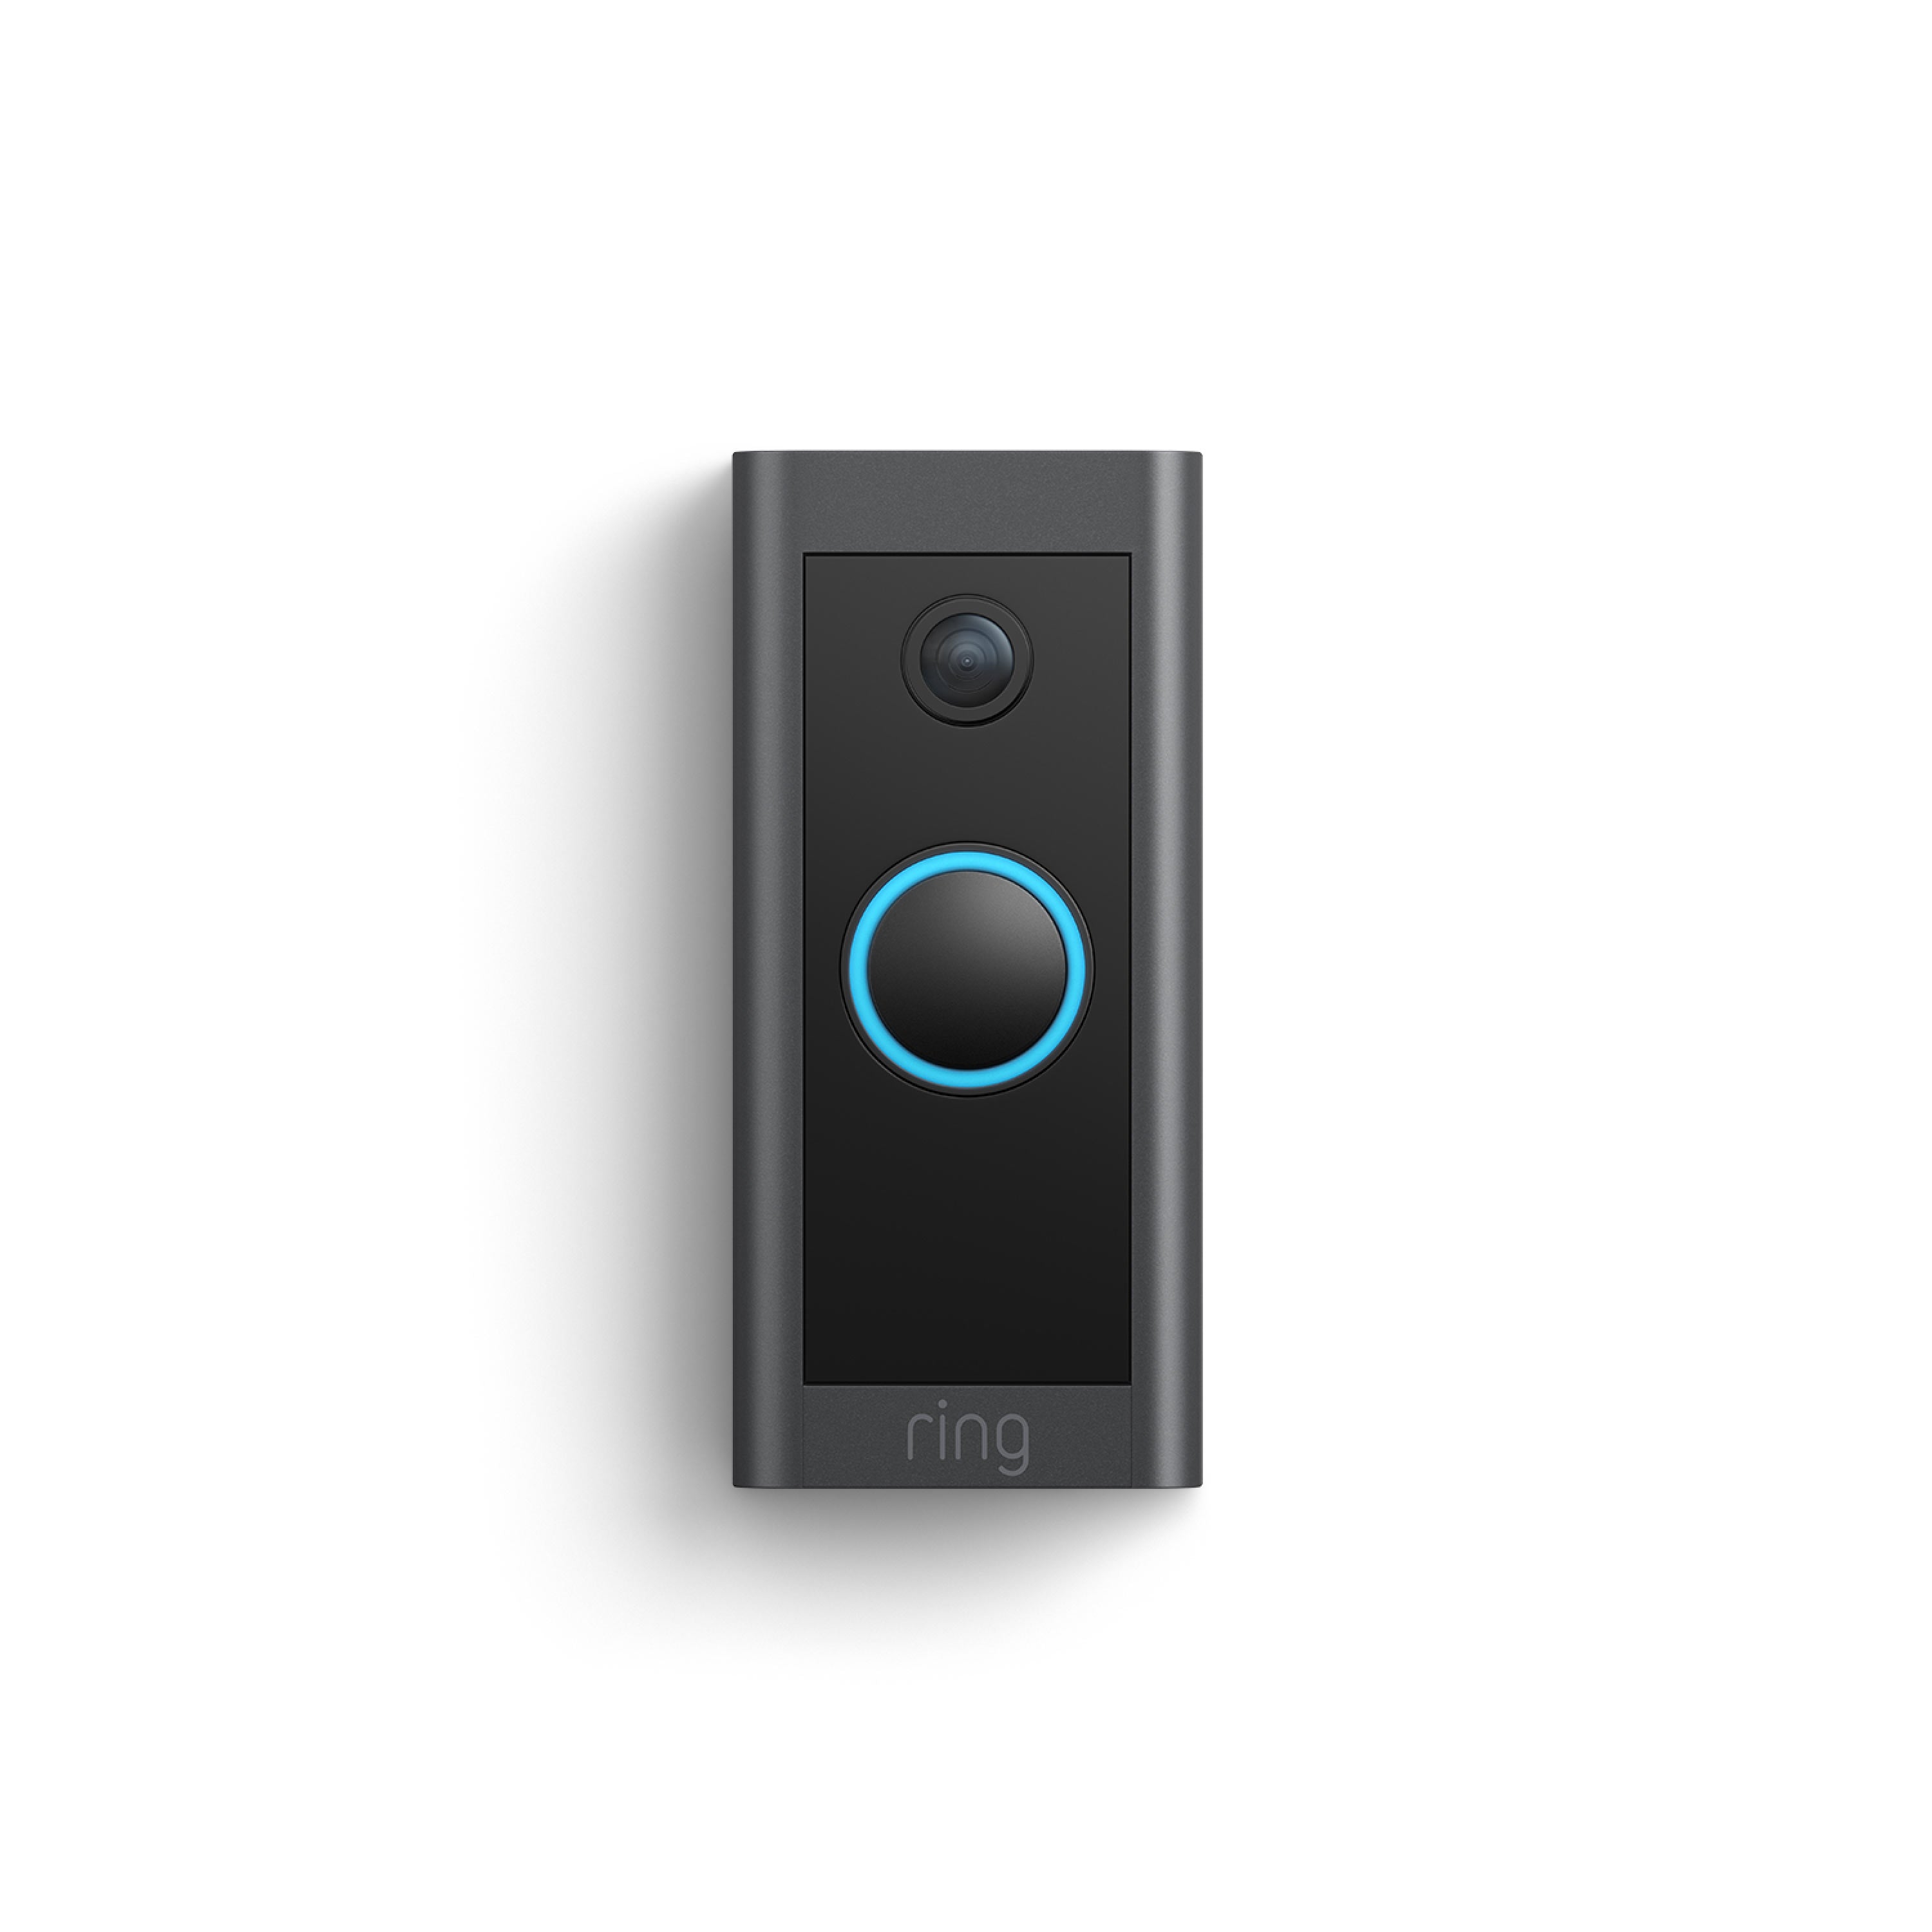 Ring Video Doorbell Wired protects your door for just £49 | Trusted Reviews